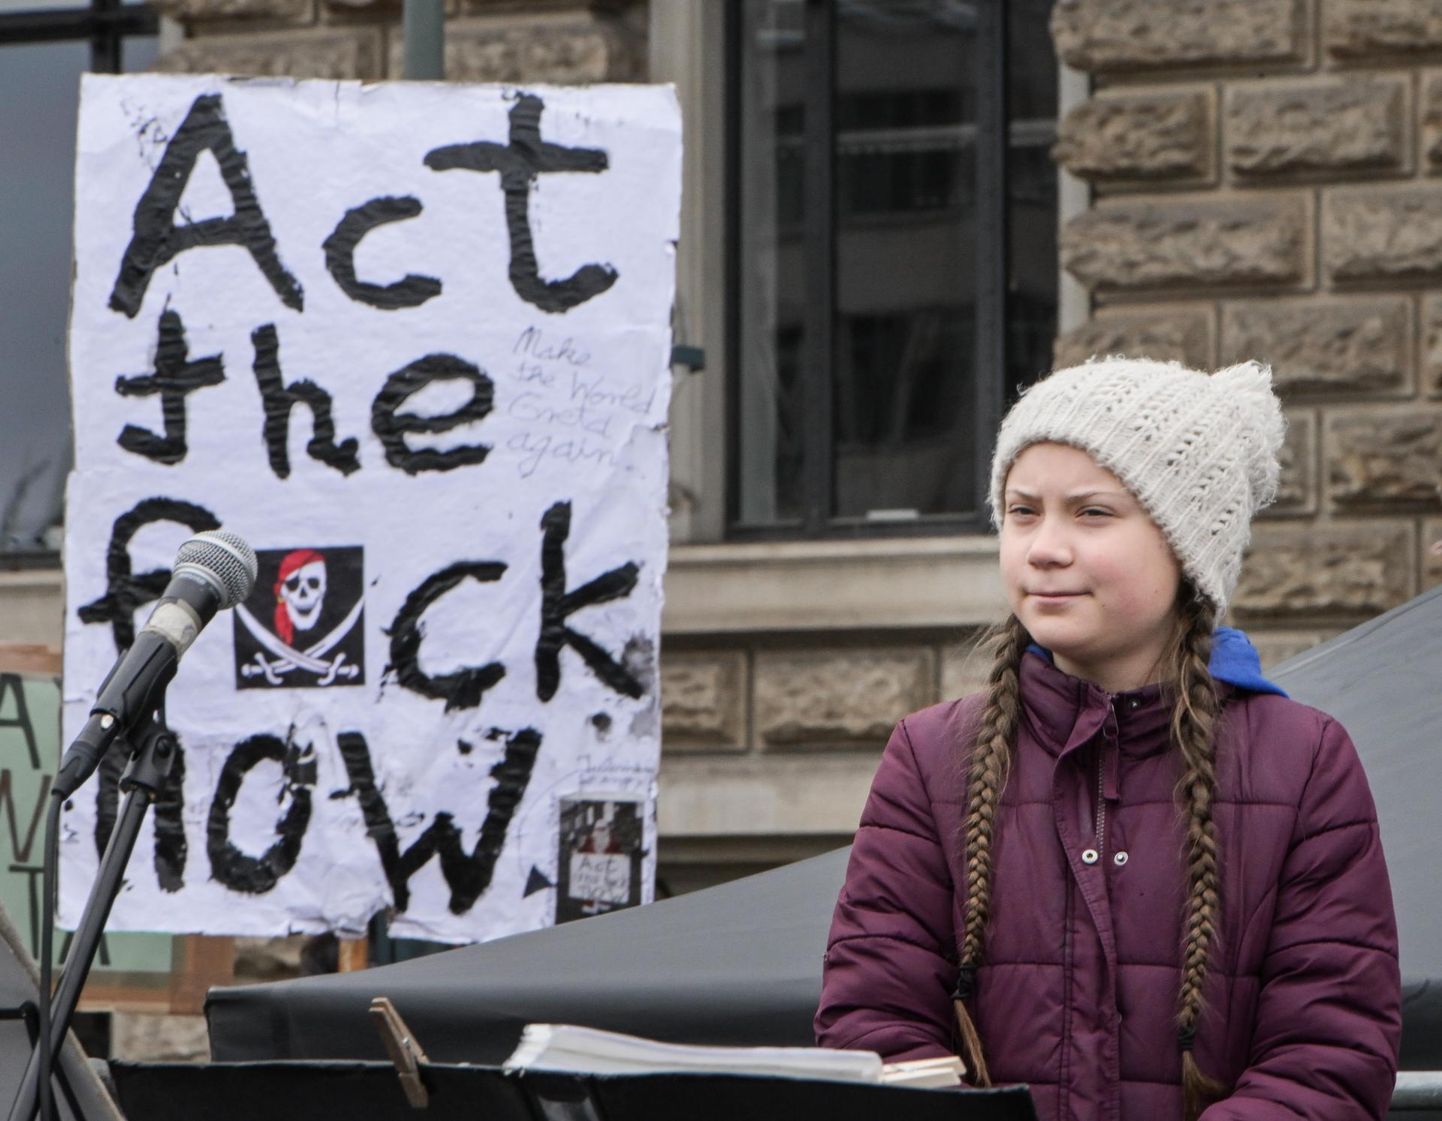 GRETA THUNBERG is speaking in front of school children, who are protesting for more action on climate change policy. FOTO: Daniel Dohlus/Zuma Press